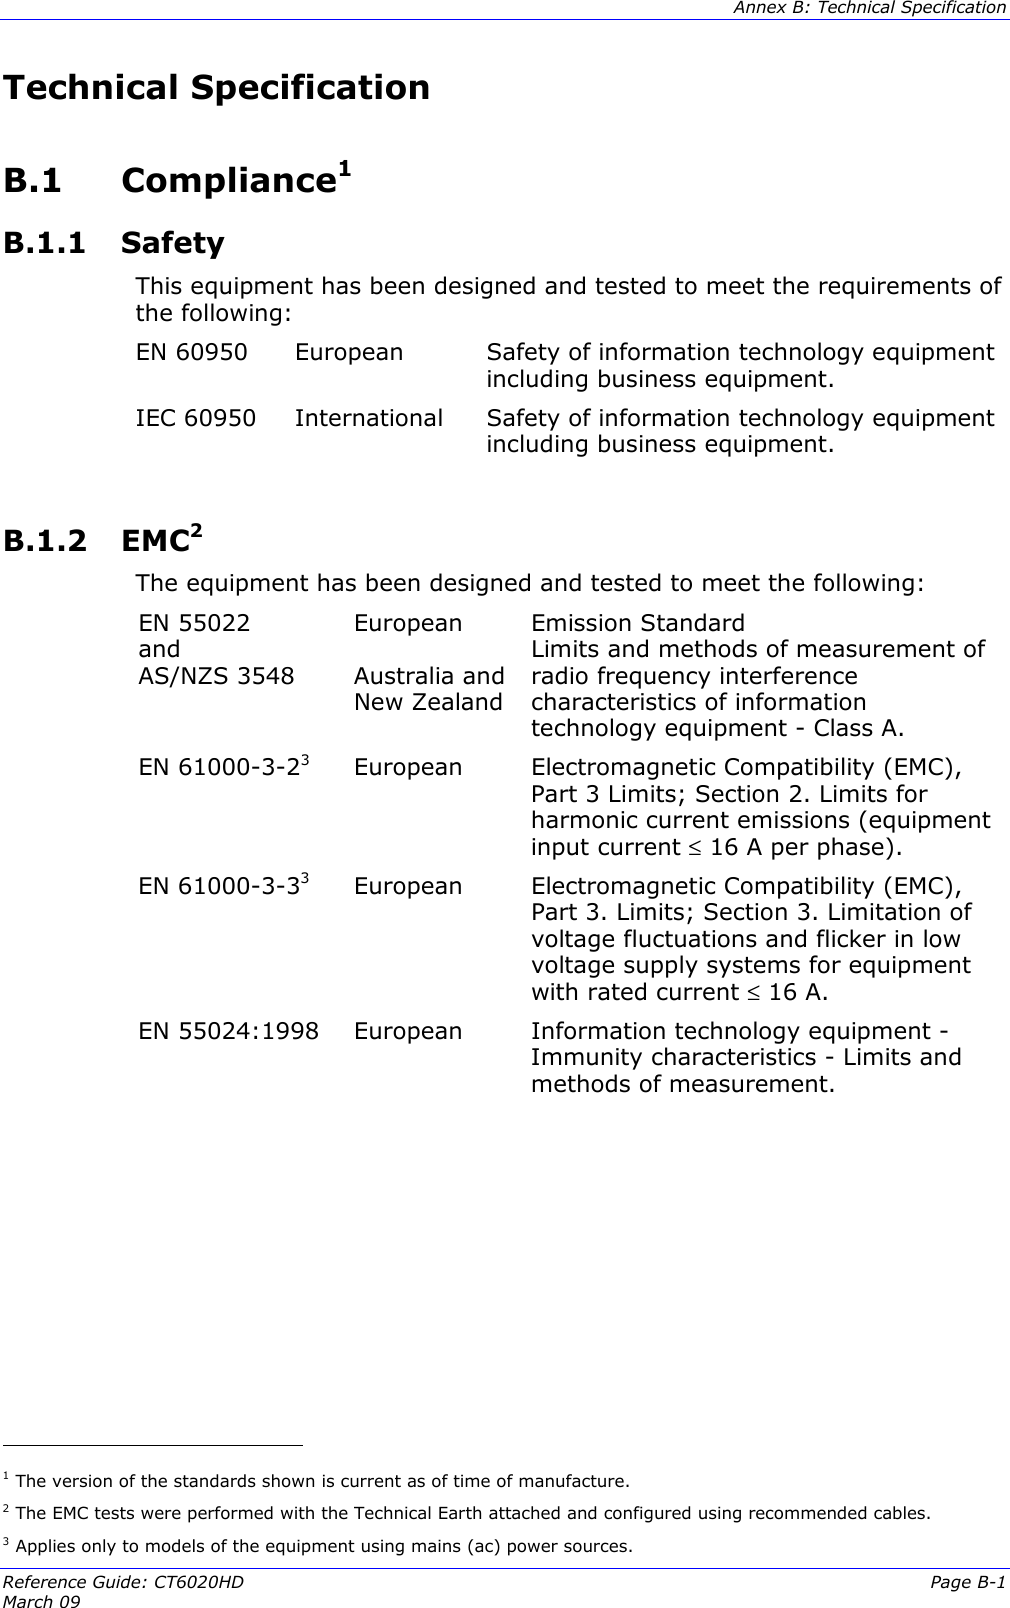  Annex B: Technical Specification  Reference Guide: CT6020HD  Page B-1 March 09   Technical Specification  B.1  Compliance1  B.1.1  Safety This equipment has been designed and tested to meet the requirements of the following:  EN 60950  European  Safety of information technology equipment including business equipment. IEC 60950  International  Safety of information technology equipment including business equipment.  B.1.2  EMC2 The equipment has been designed and tested to meet the following:  EN 55022  and AS/NZS 3548   European  Australia and New Zealand Emission Standard Limits and methods of measurement of radio frequency interference characteristics of information technology equipment - Class A. EN 61000-3-23  European  Electromagnetic Compatibility (EMC), Part 3 Limits; Section 2. Limits for harmonic current emissions (equipment input current ≤ 16 A per phase). EN 61000-3-33  European  Electromagnetic Compatibility (EMC), Part 3. Limits; Section 3. Limitation of voltage fluctuations and flicker in low voltage supply systems for equipment with rated current ≤ 16 A. EN 55024:1998   European  Information technology equipment - Immunity characteristics - Limits and methods of measurement.                                             1 The version of the standards shown is current as of time of manufacture. 2 The EMC tests were performed with the Technical Earth attached and configured using recommended cables. 3 Applies only to models of the equipment using mains (ac) power sources. 